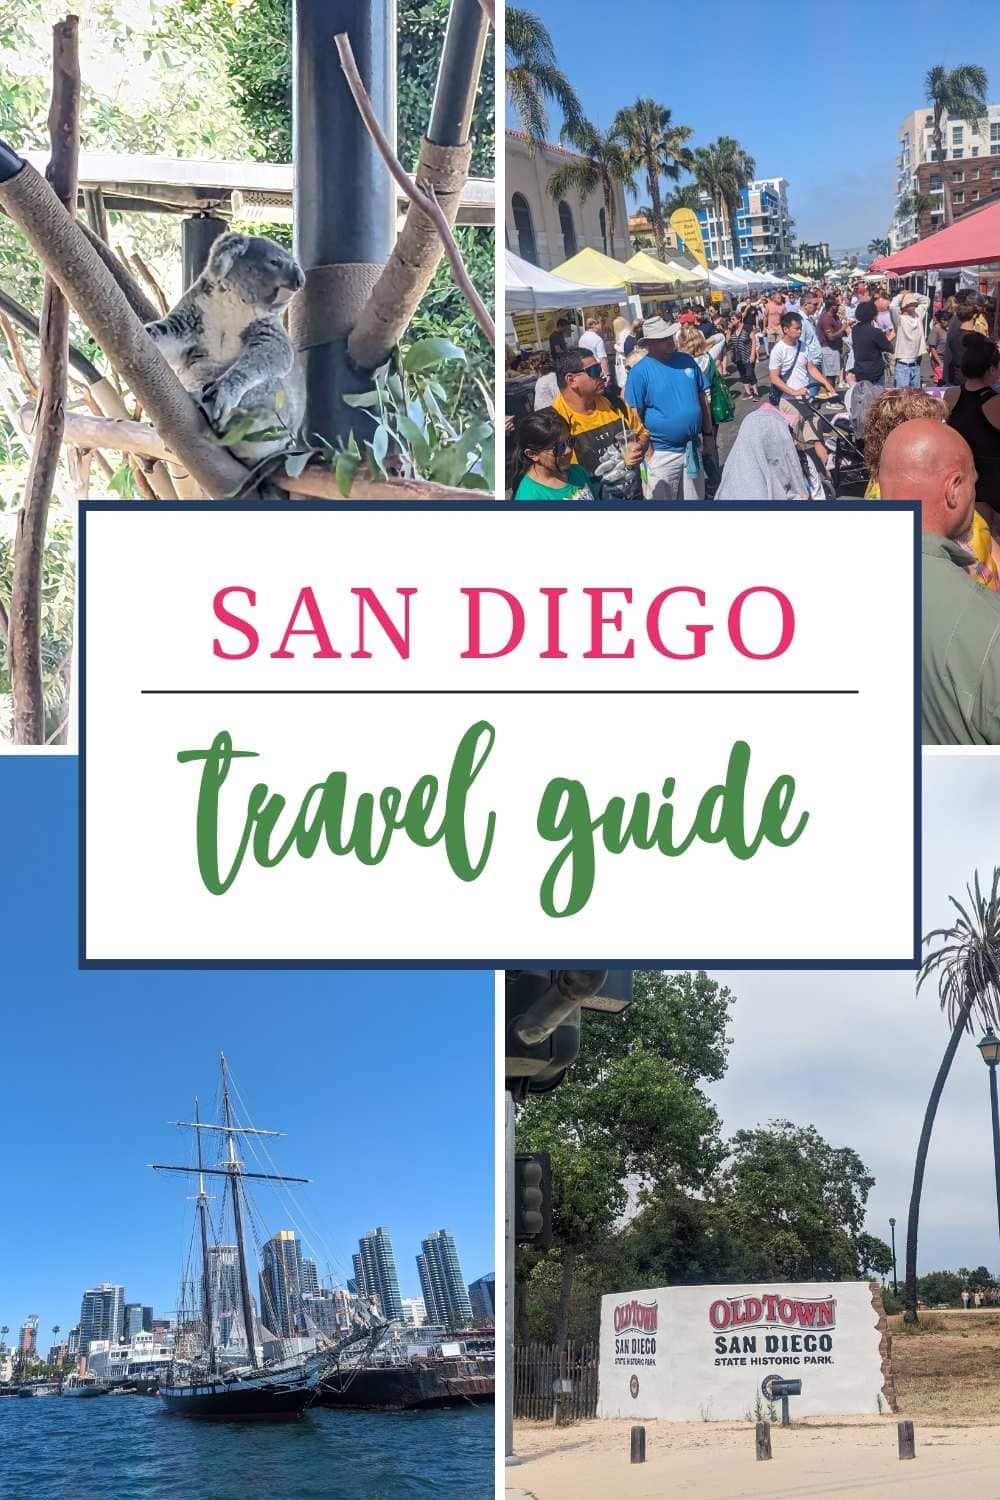 Want to unearth San Diego's best kept secrets? This post shares some can't miss options as well as some hidden gems you might not know about. Brace yourself for a thrilling ride! via @pullingcurls